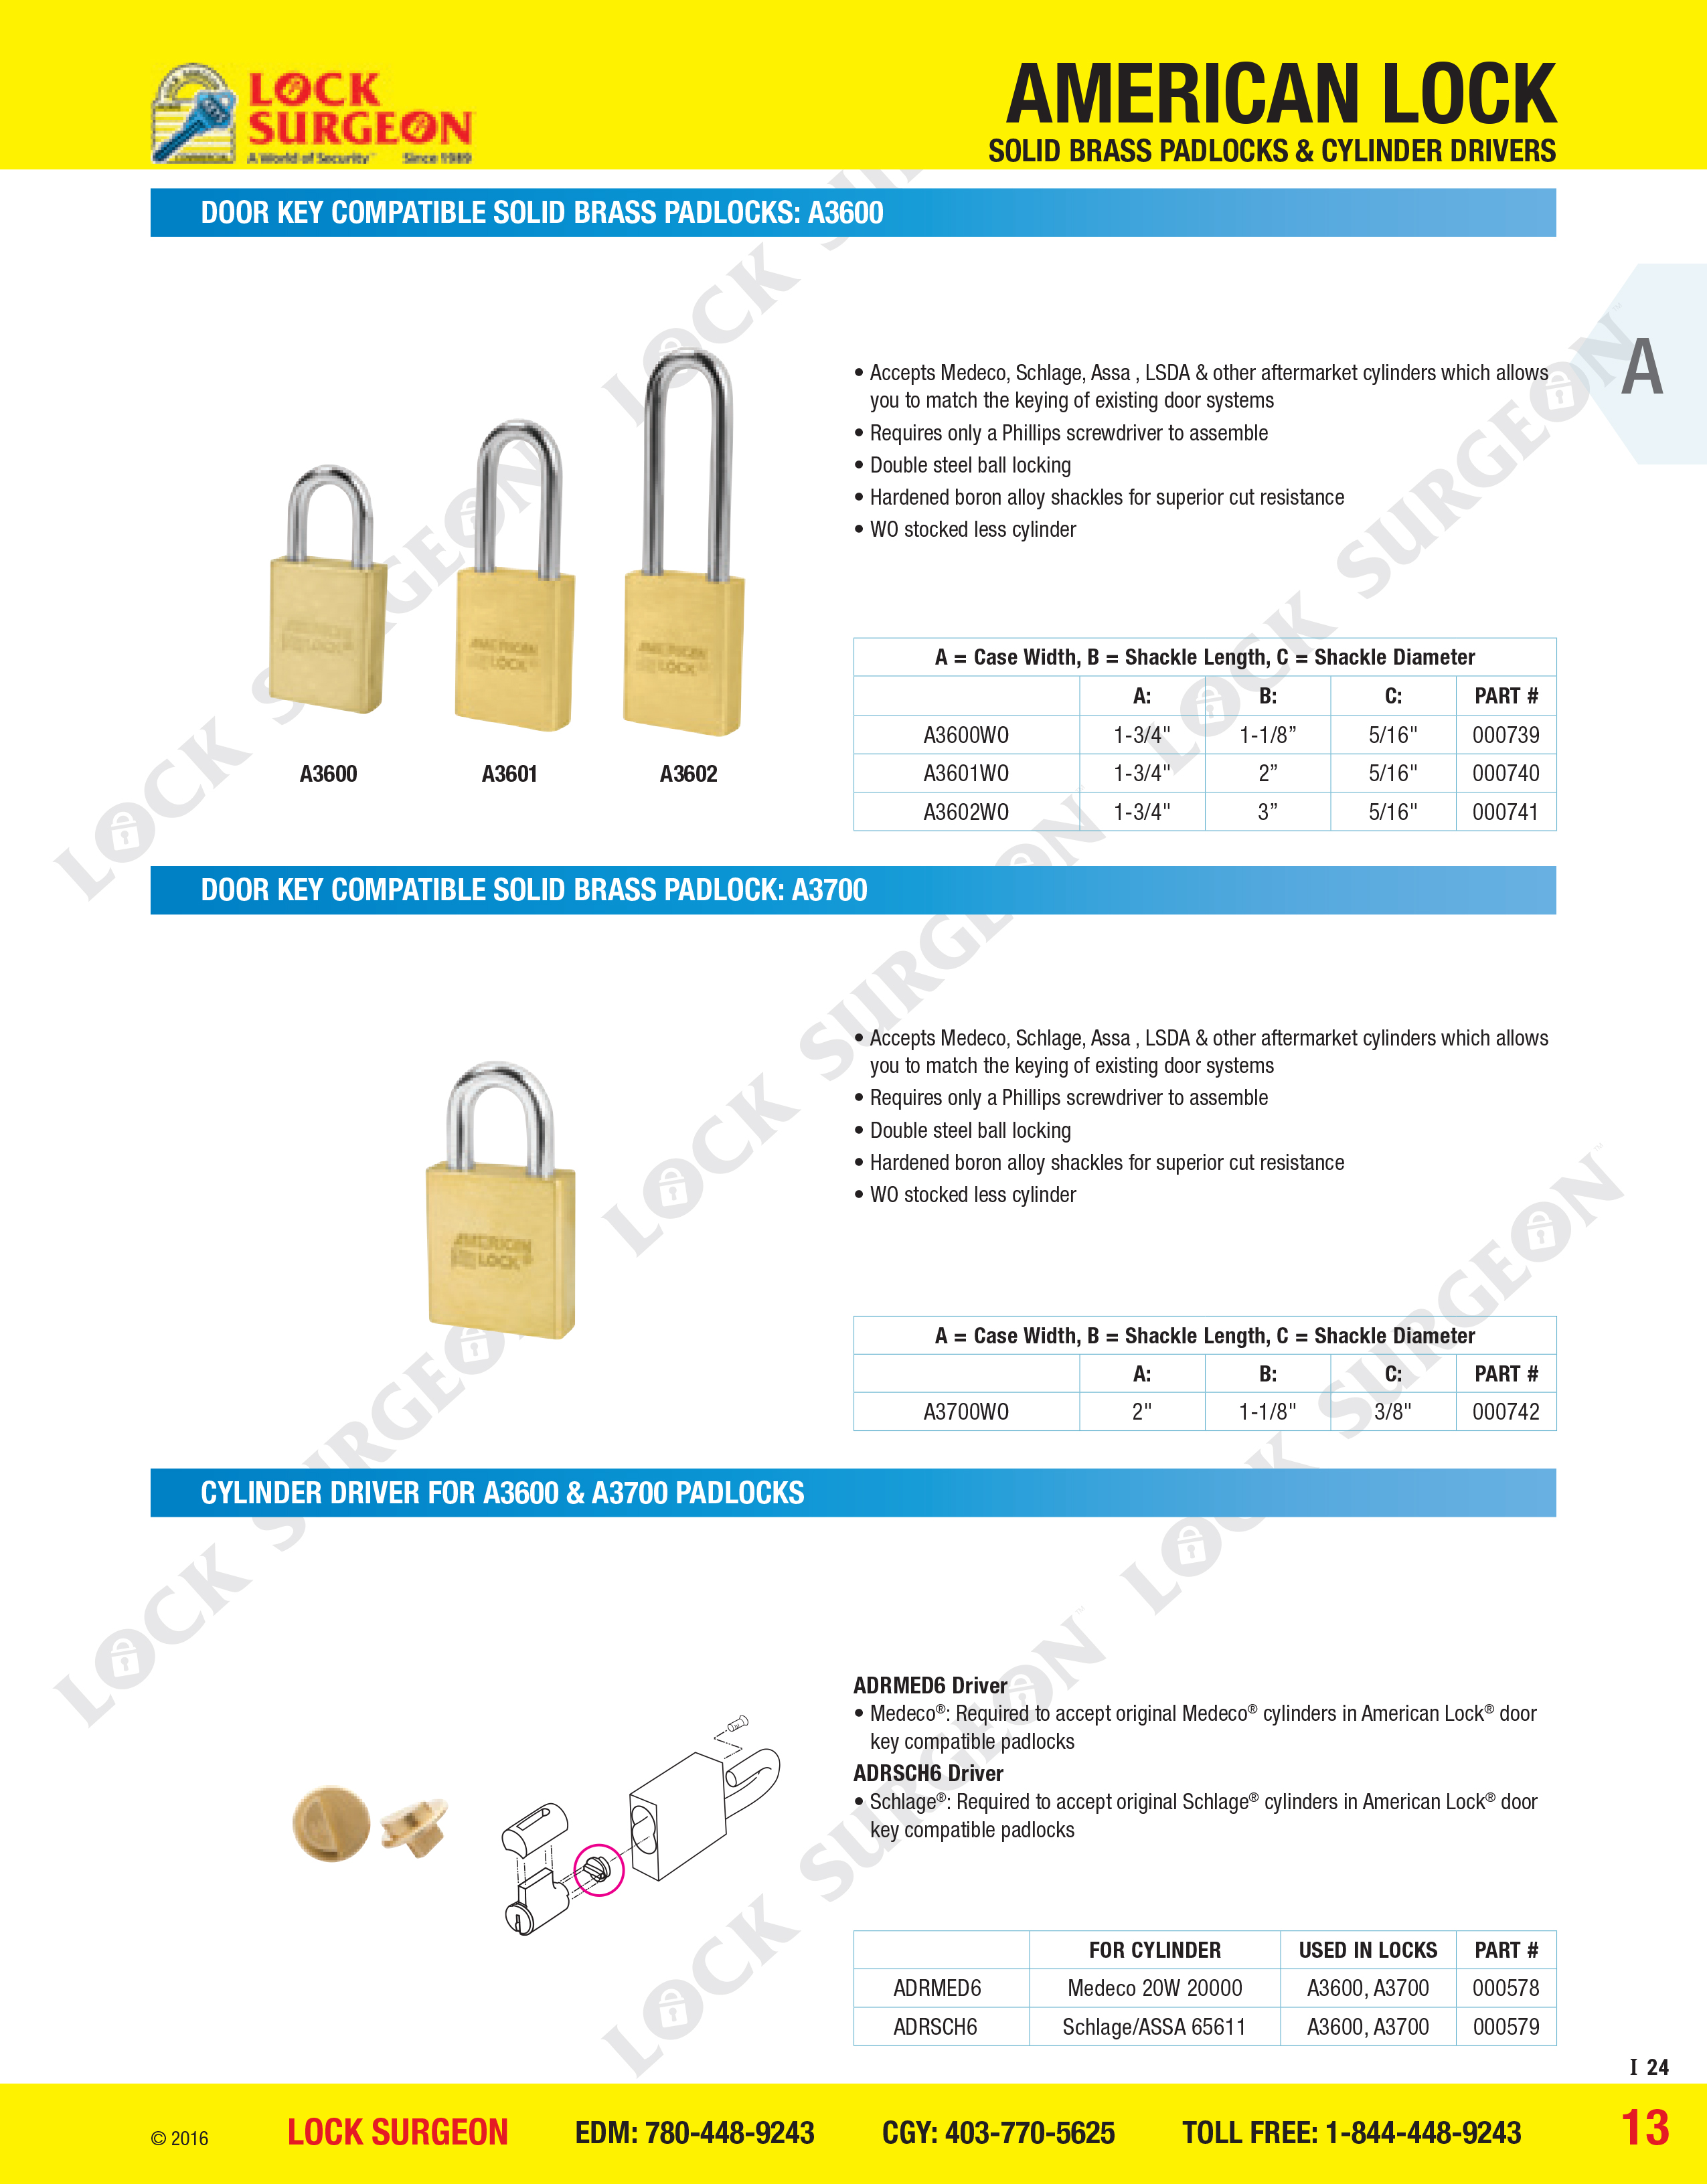 Door key compatible solid brass padlocks: A3600, A3700 Cylider drivers for A3600, A3700 Padlocks